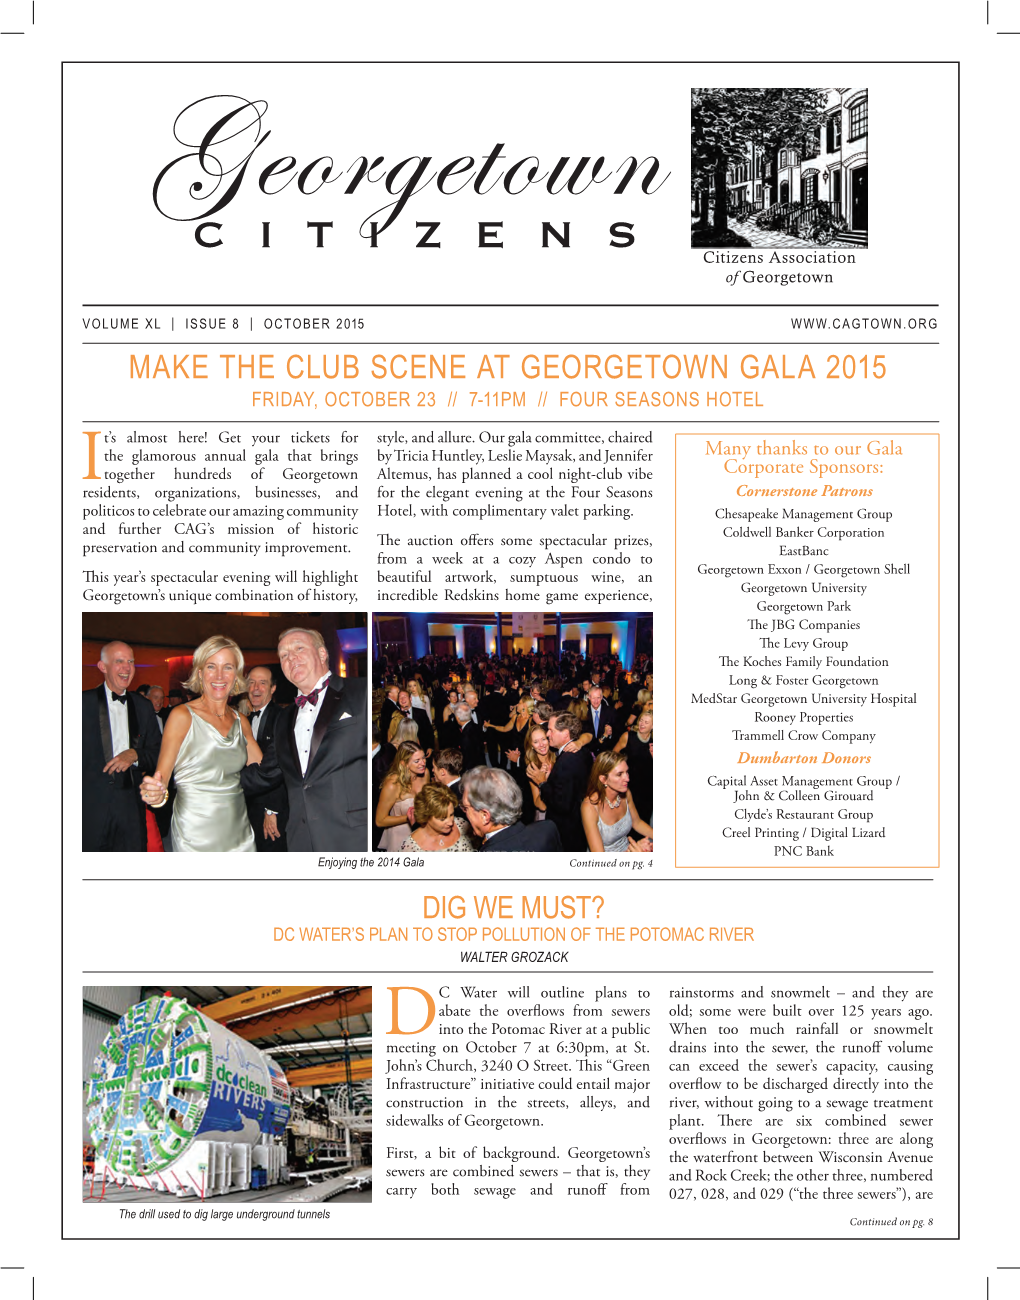 Make the Club Scene at Georgetown Gala 2015 Friday, October 23 // 7-11Pm // Four Seasons Hotel